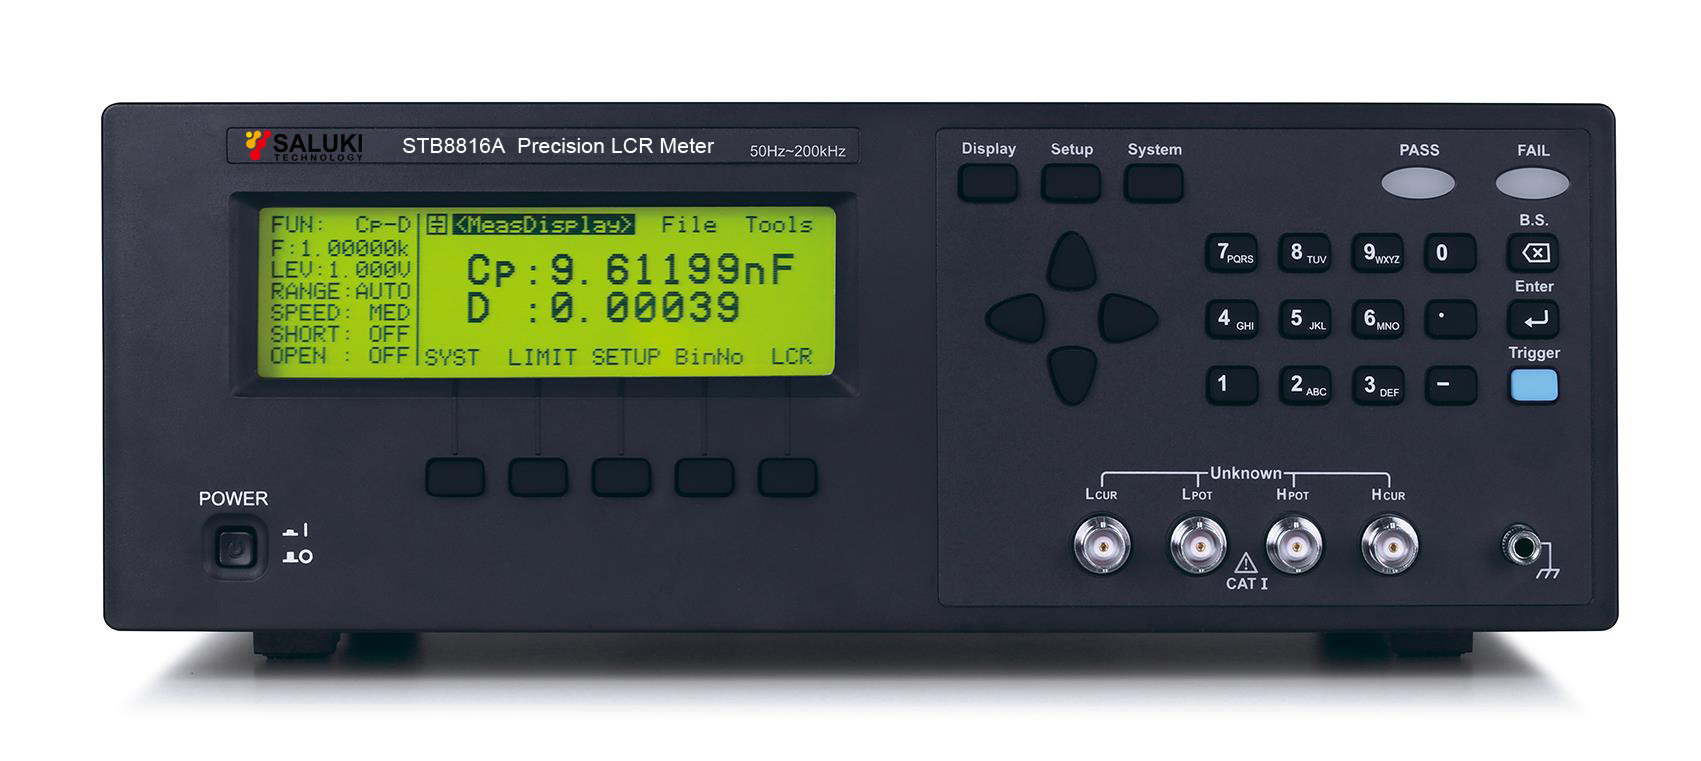 STB8816 Series Precision LCR Meter